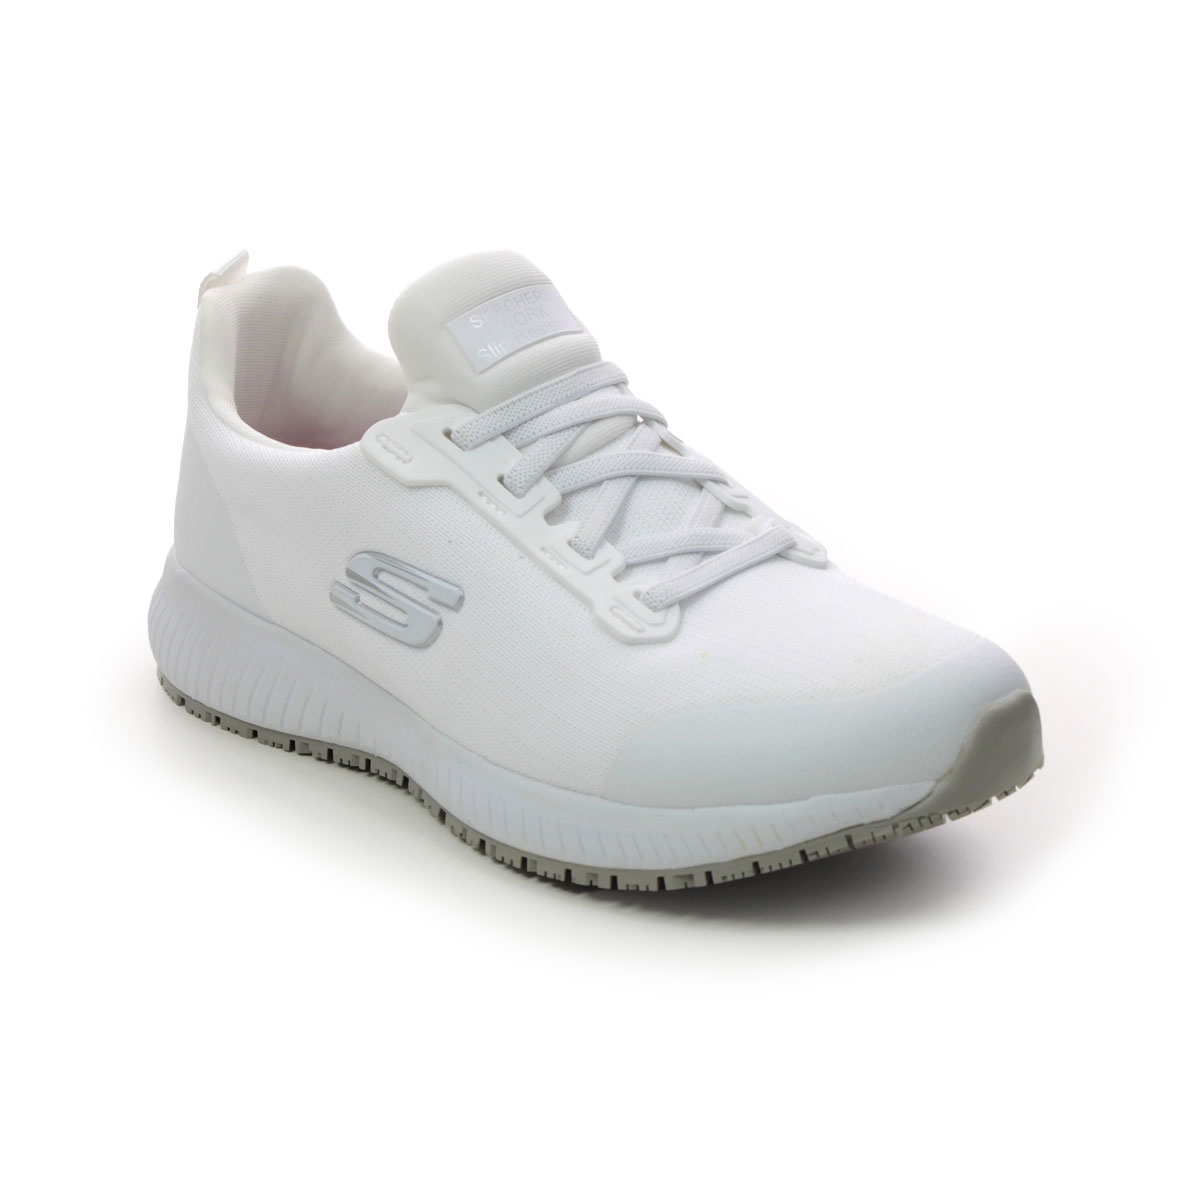 Skechers Work Squad Slip Resistant White Womens Trainers 77222Ec In Size 5.5 In Plain White